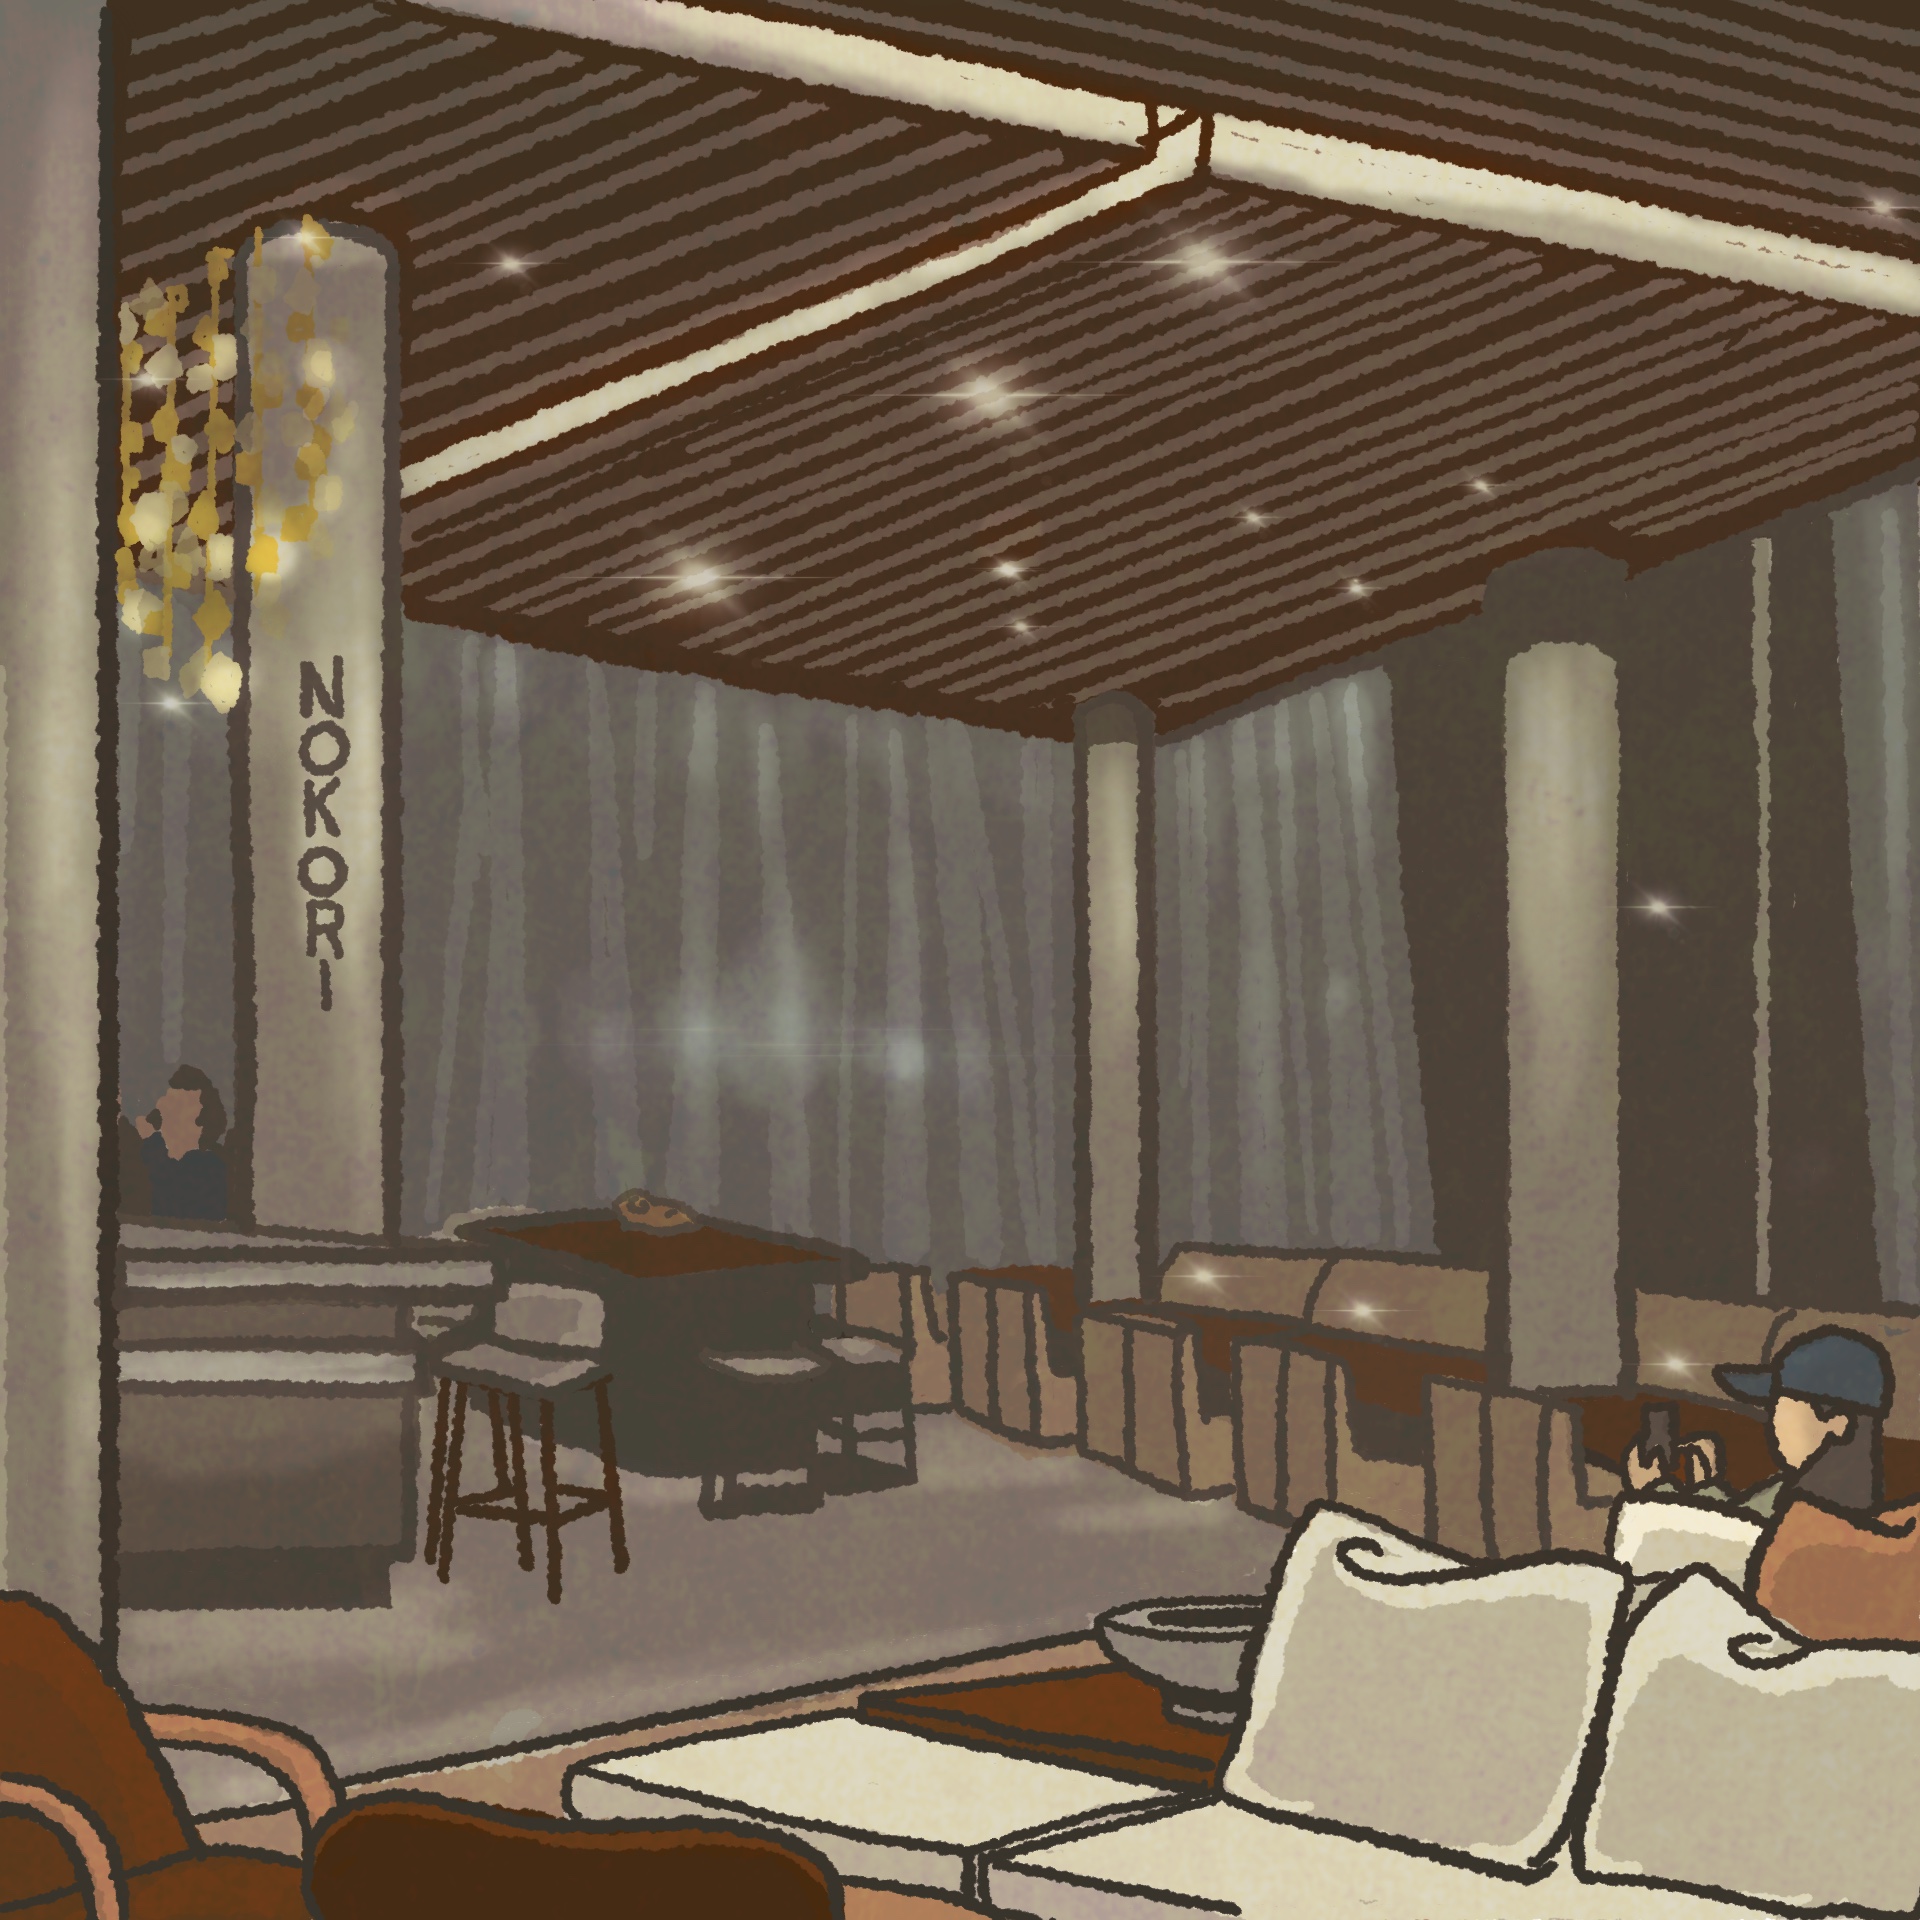 Illustration: An elegant hotel lobby with modern, minimalist couches and an elegant bar at one end of the room, with sparkly gold leaves dangling from the ceiling.